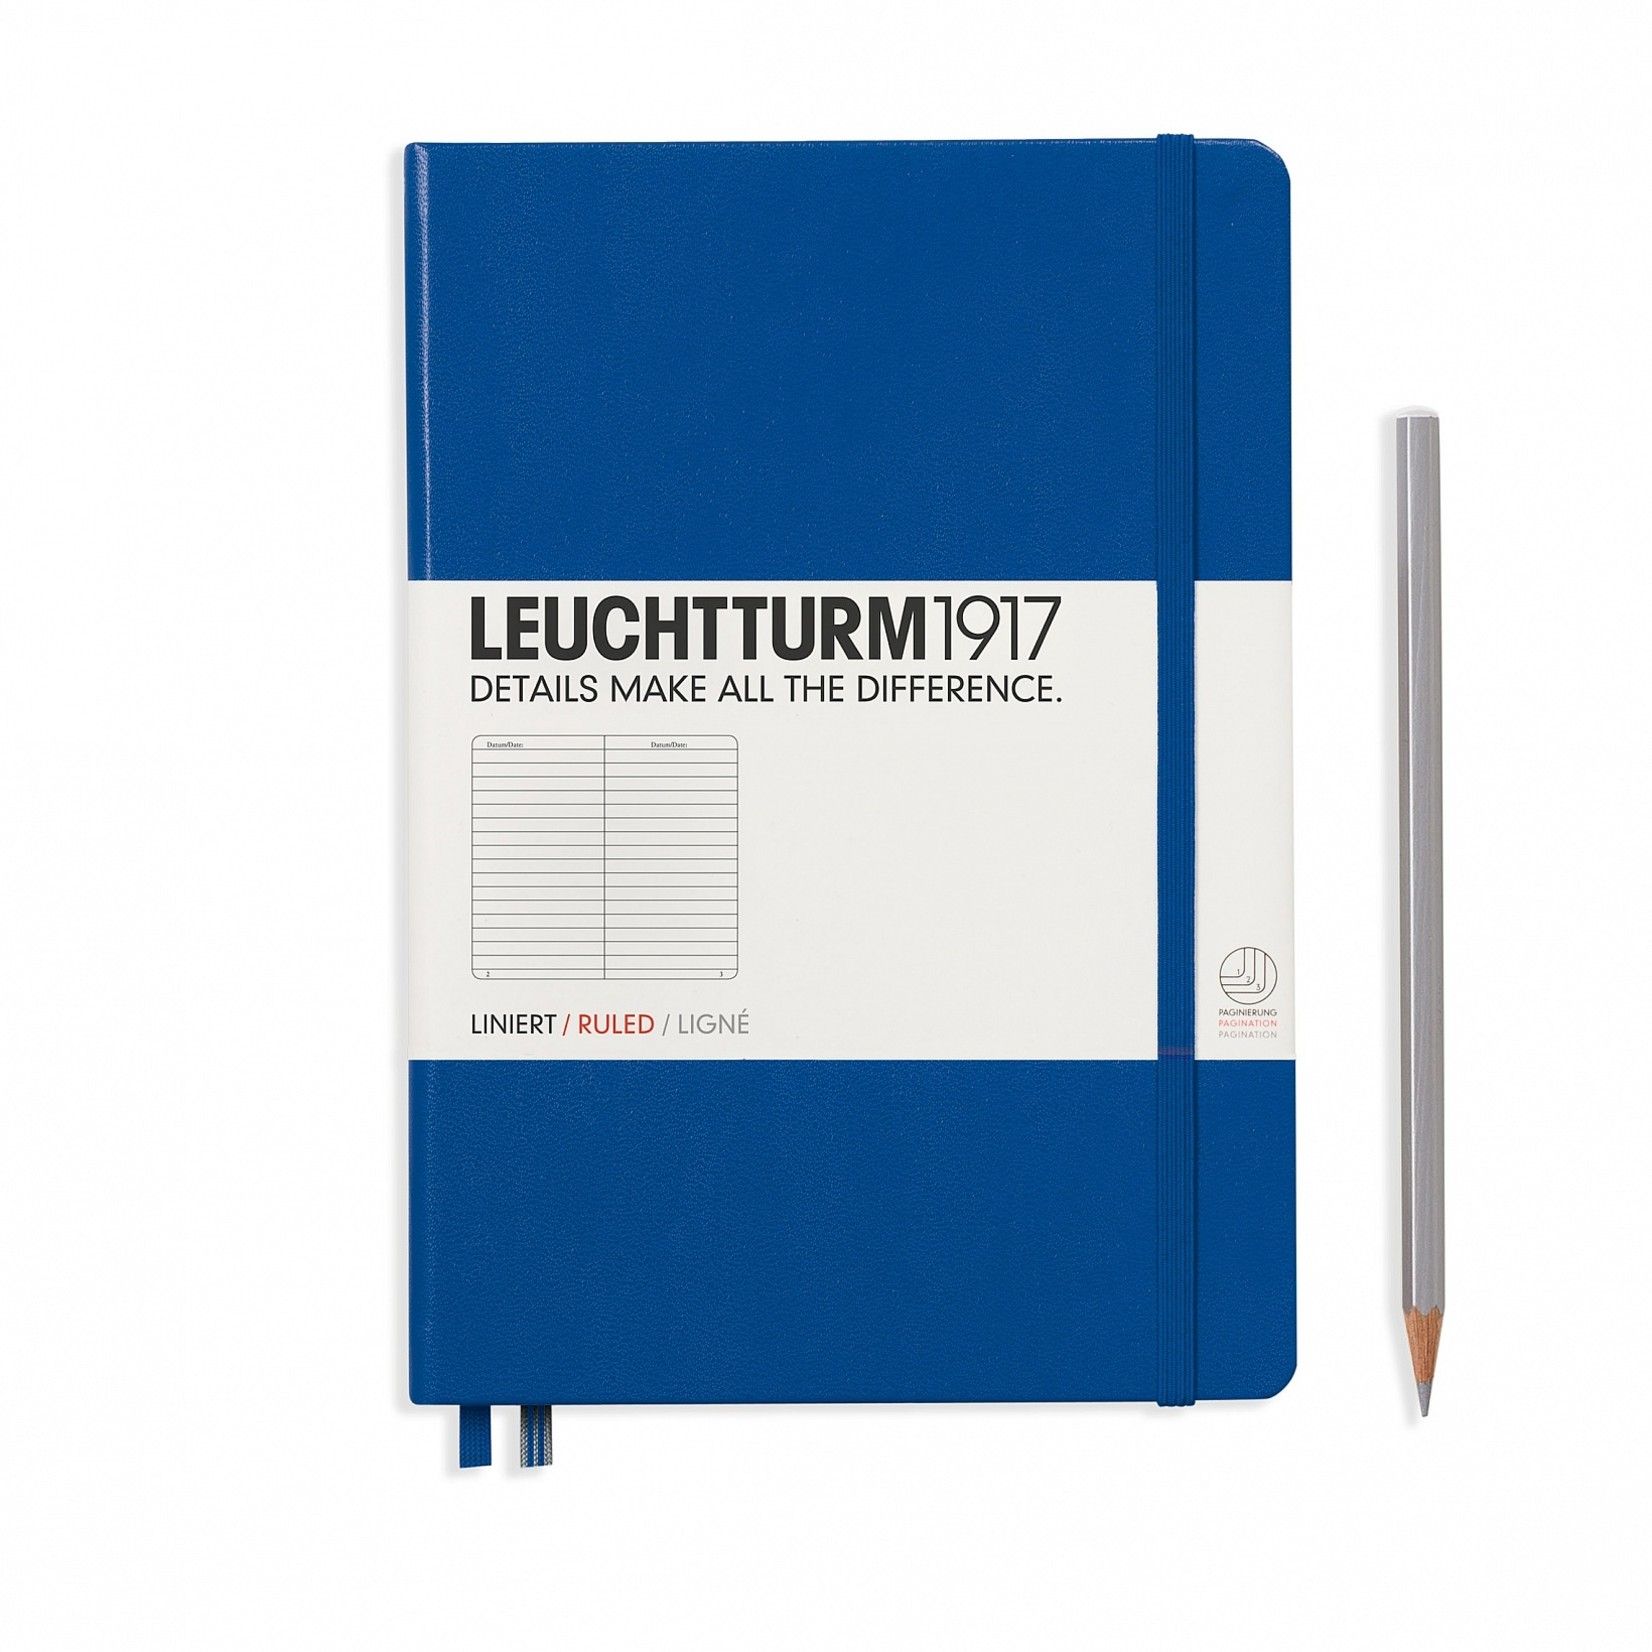 LEUCHTTURM1917 Notebook Hardcover Pocket (A6) - 187 pages - Royal Blue/Ruled